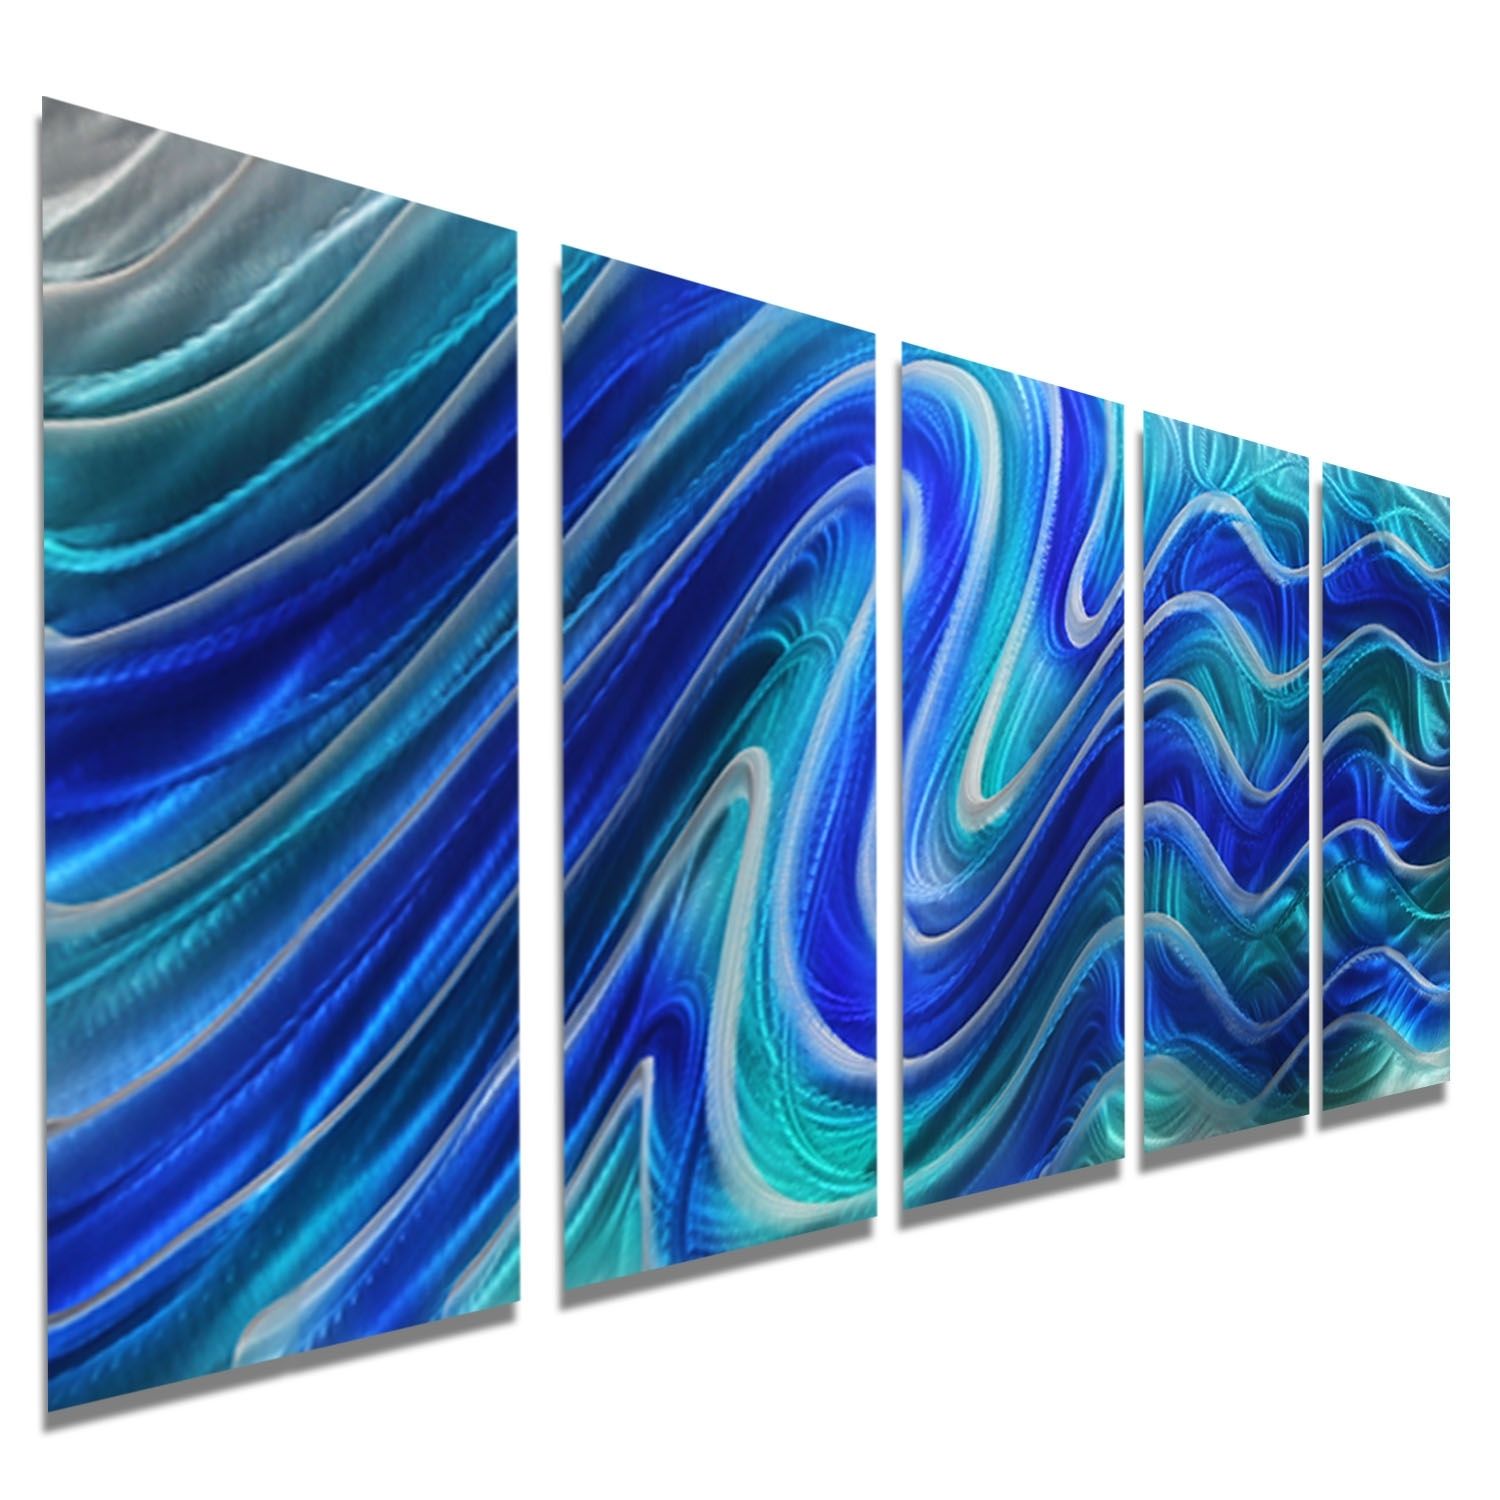 Paradise Plunge – Blue, Teal And Silver Metal Wall Art – 5 Panel For Blue Wall Art (View 16 of 20)